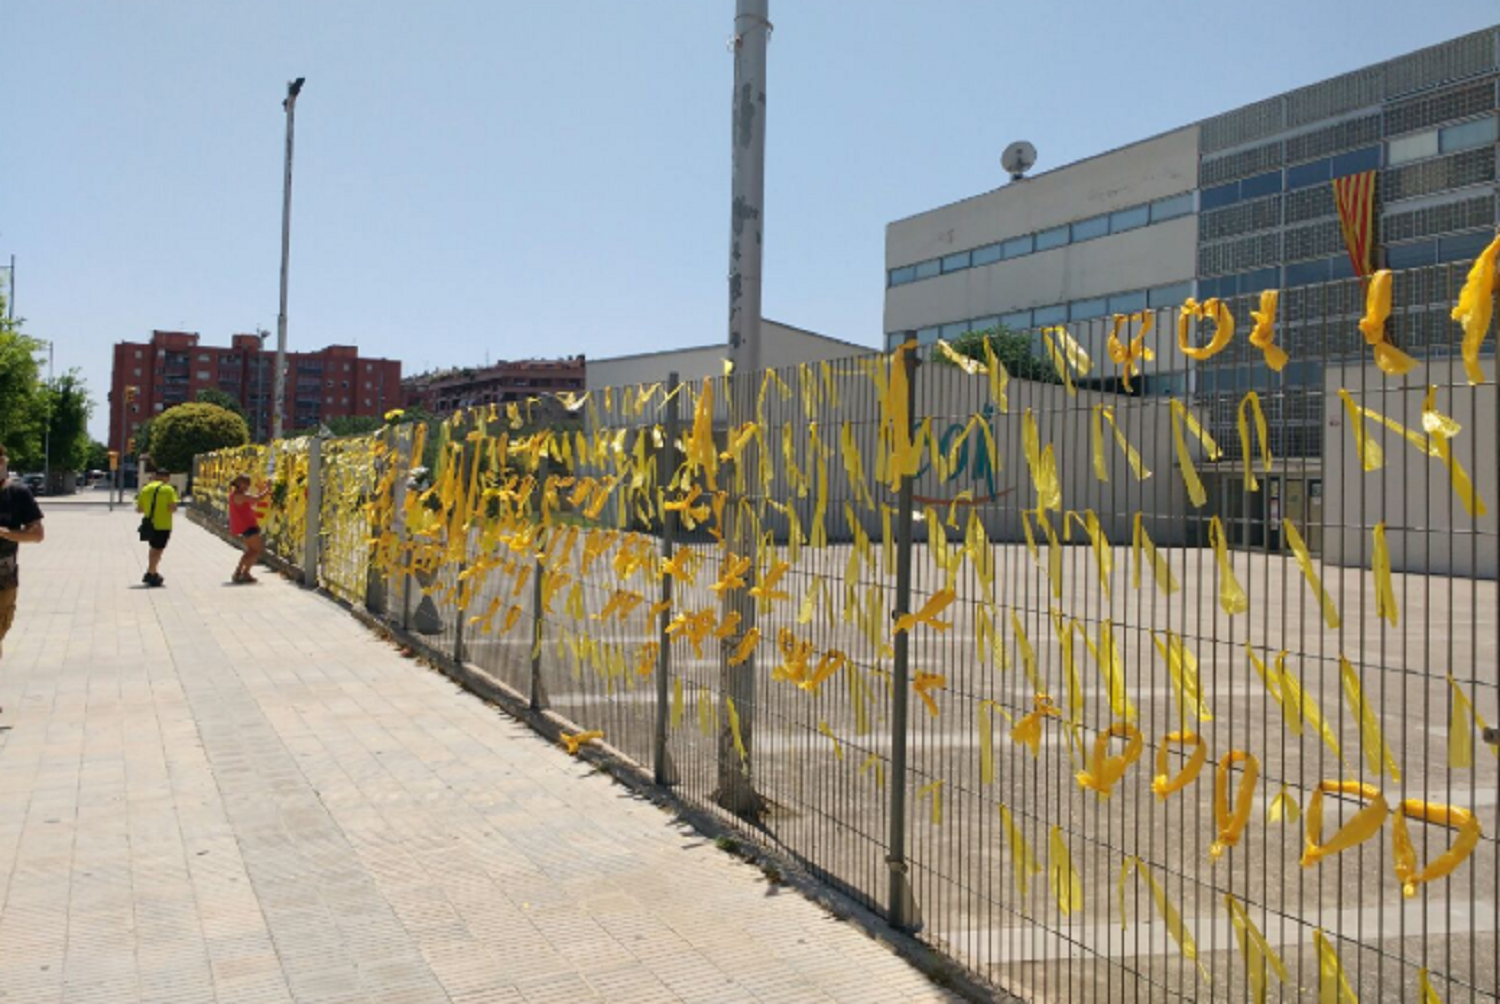 Ciutadans urges supporters to remove yellow loops from streets